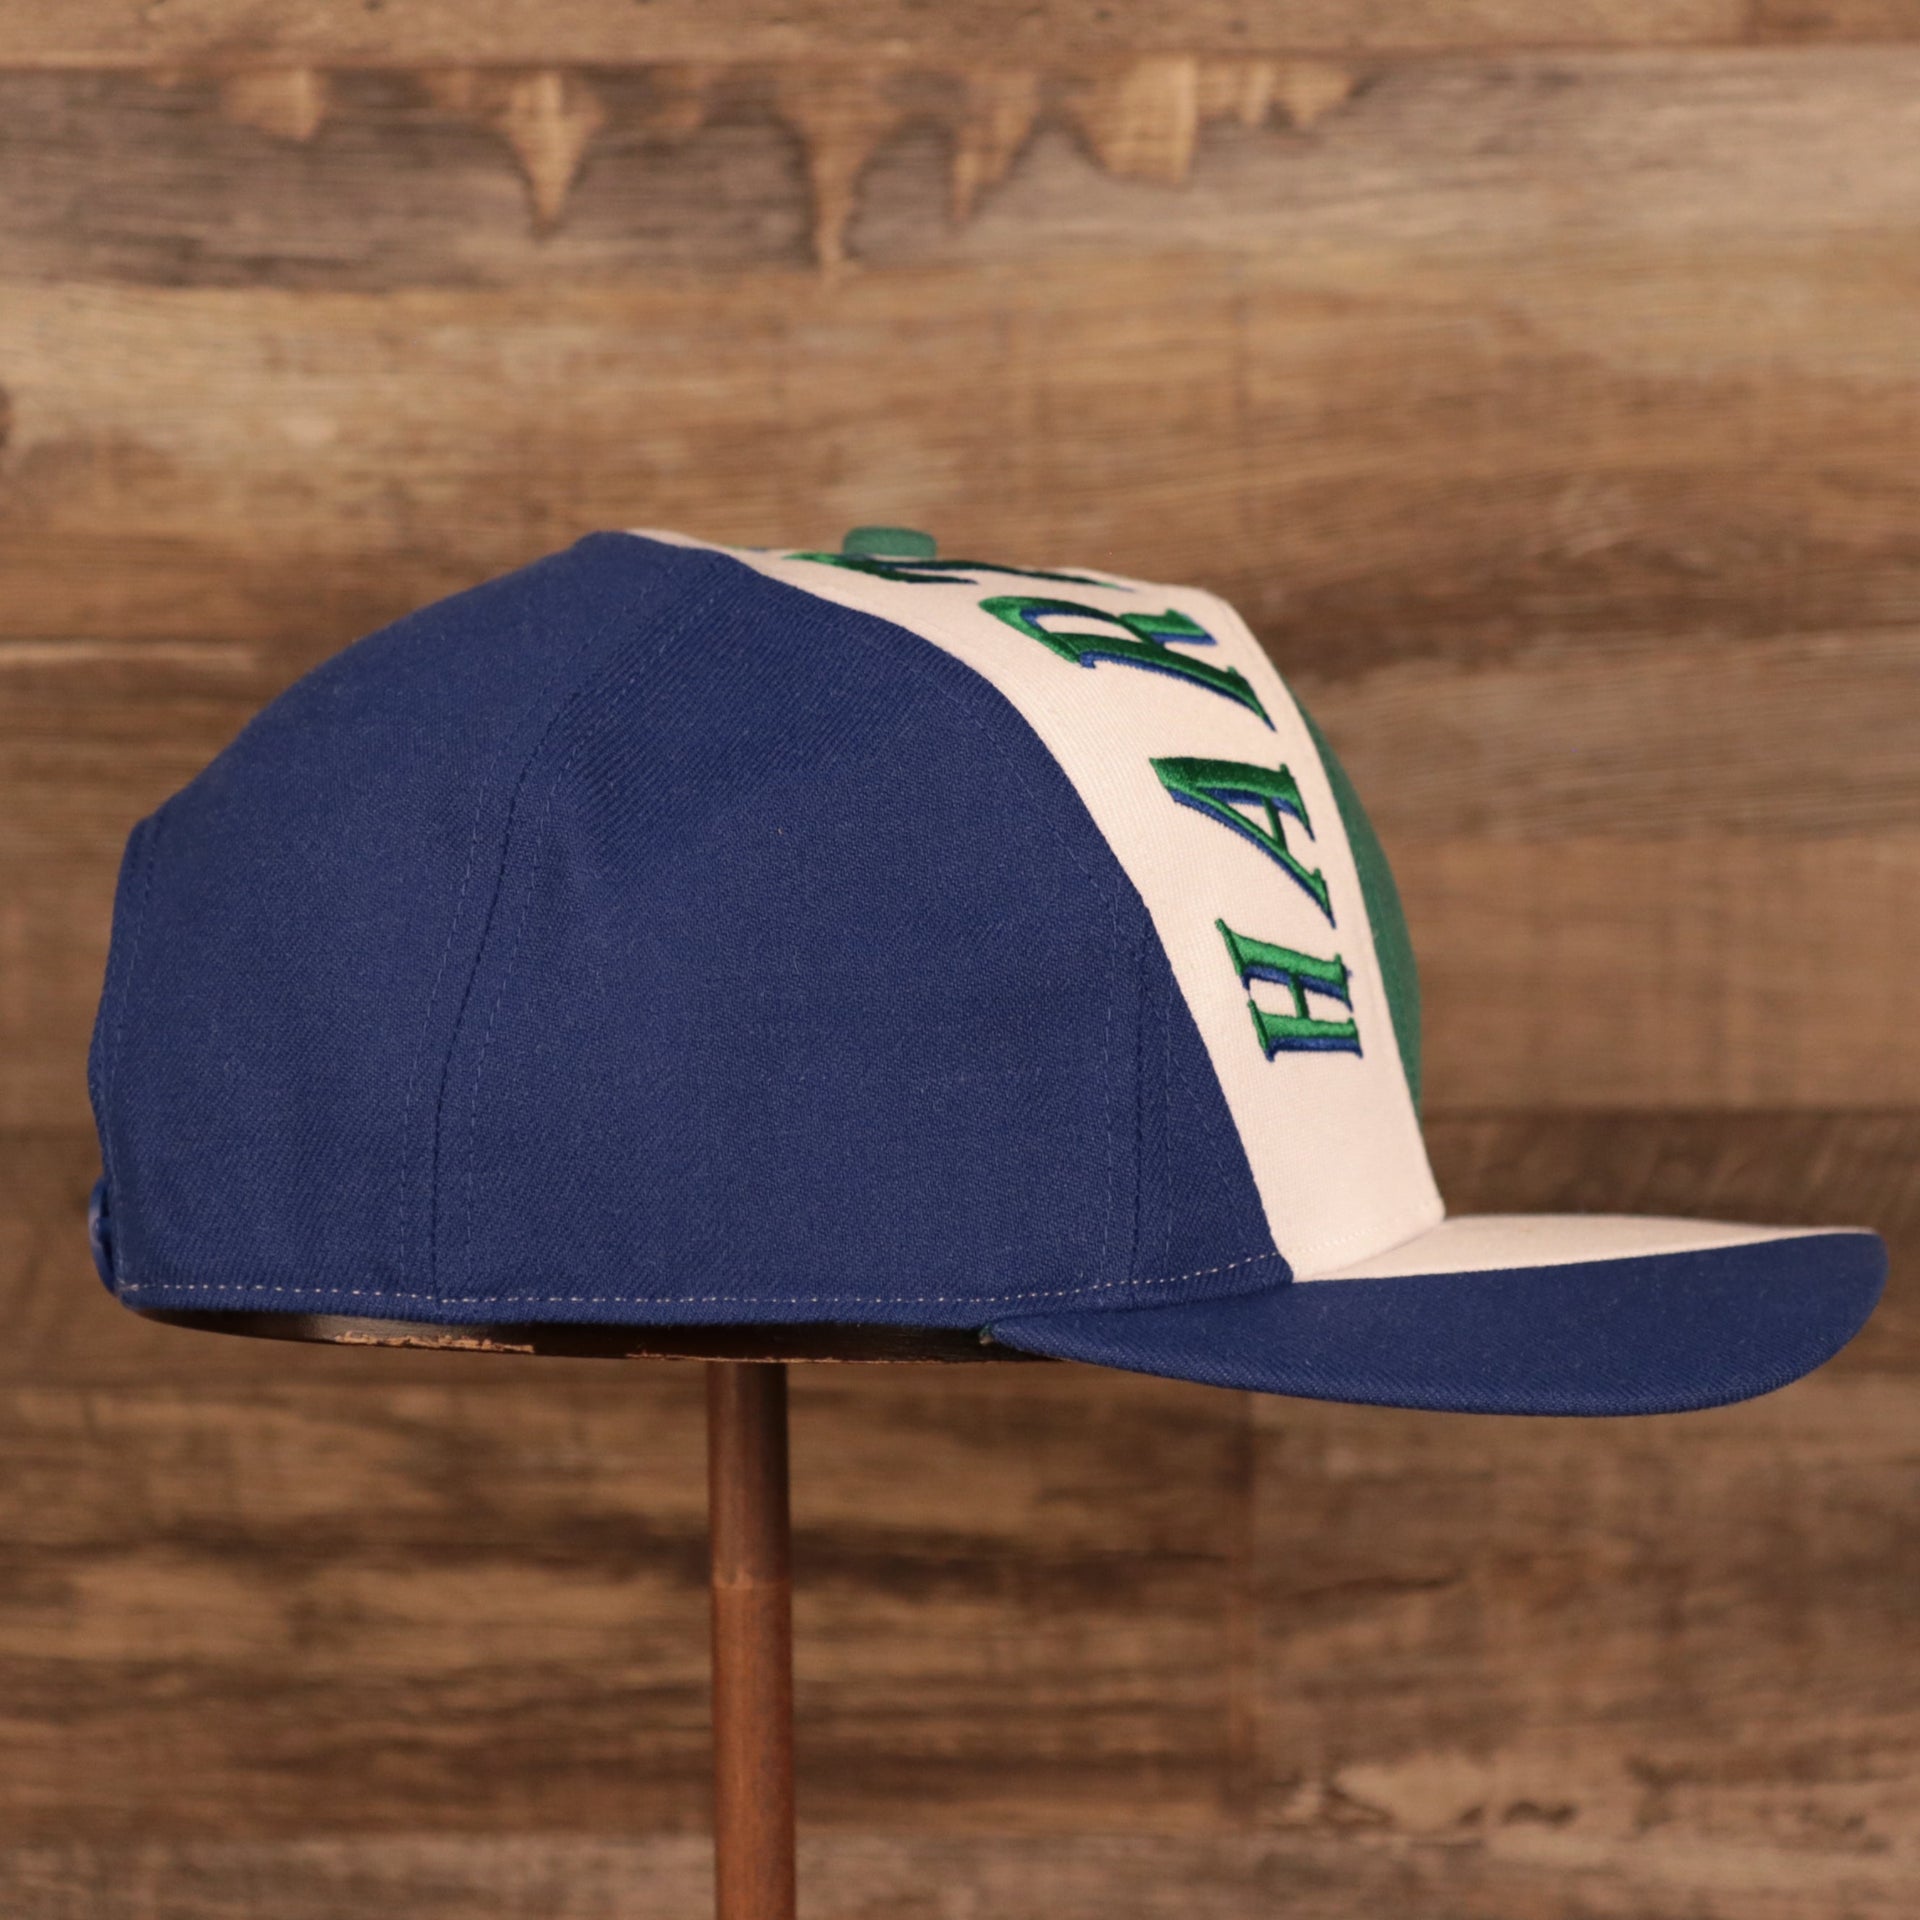 wearers right side of the Hartford Whalers Blue White & Green Retro Adjustable Snapback Cap